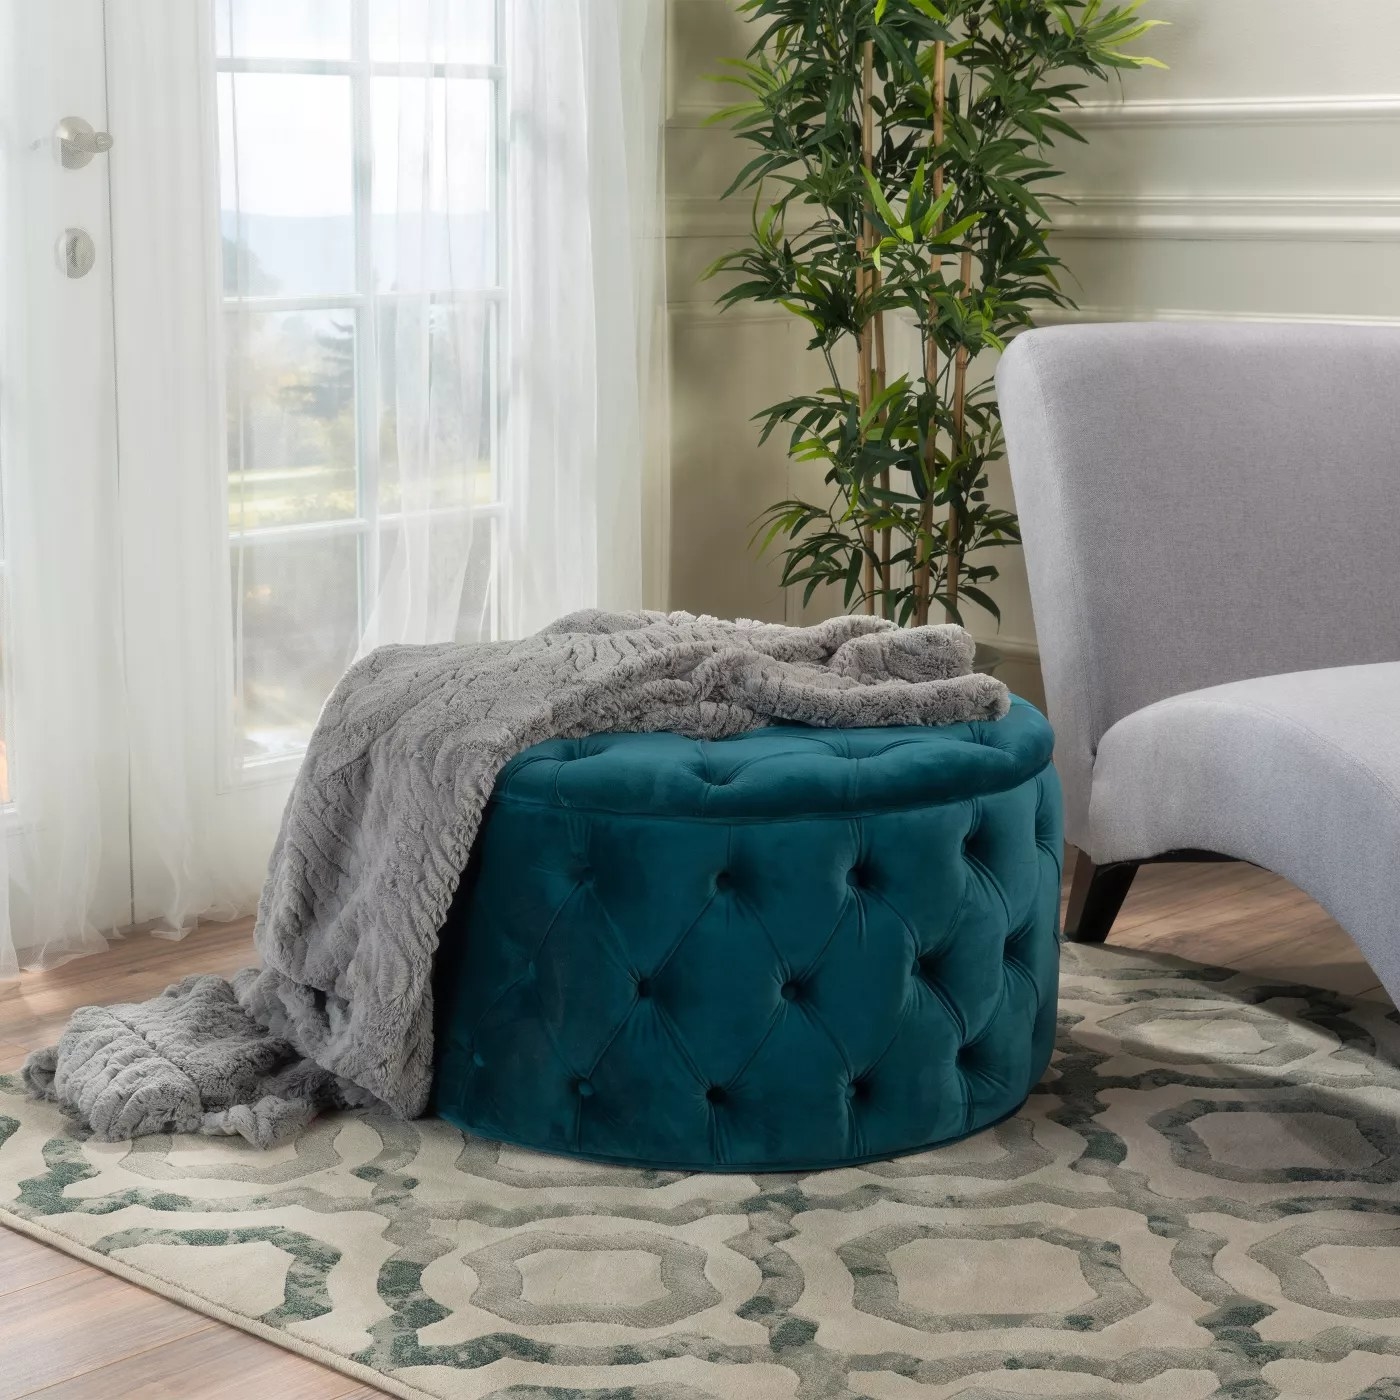 The tufted ottoman in teal